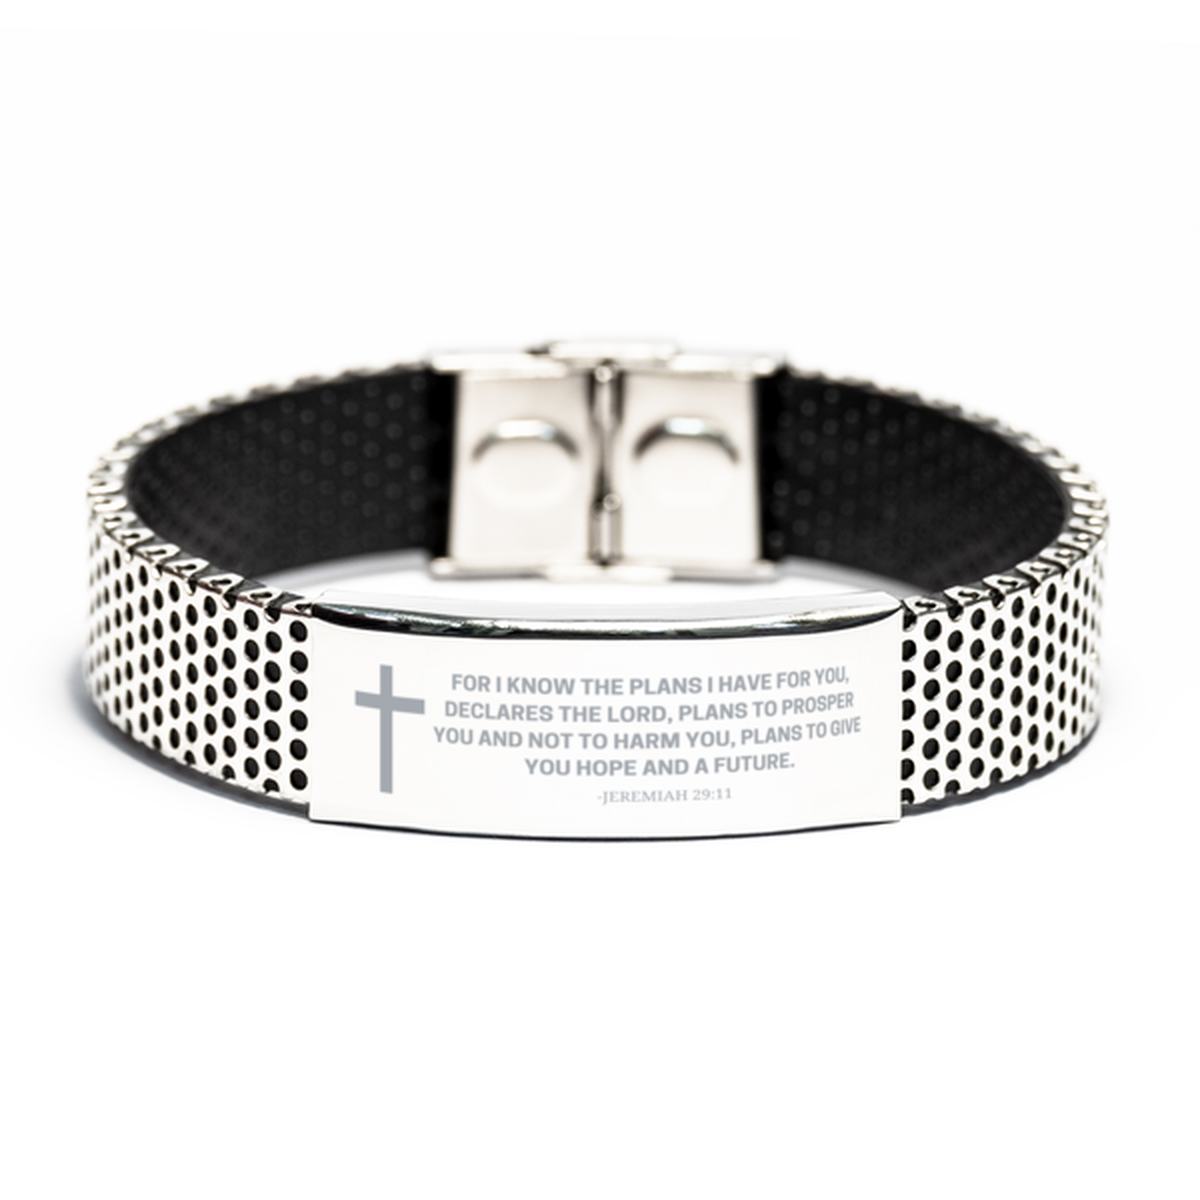 Baptism Gifts For Teenage Boys Girls, Christian Bible Verse Stainless Steel Bracelet, For I know the plans, Catholic Confirmation Gifts for Son, Godson, Grandson, Nephew